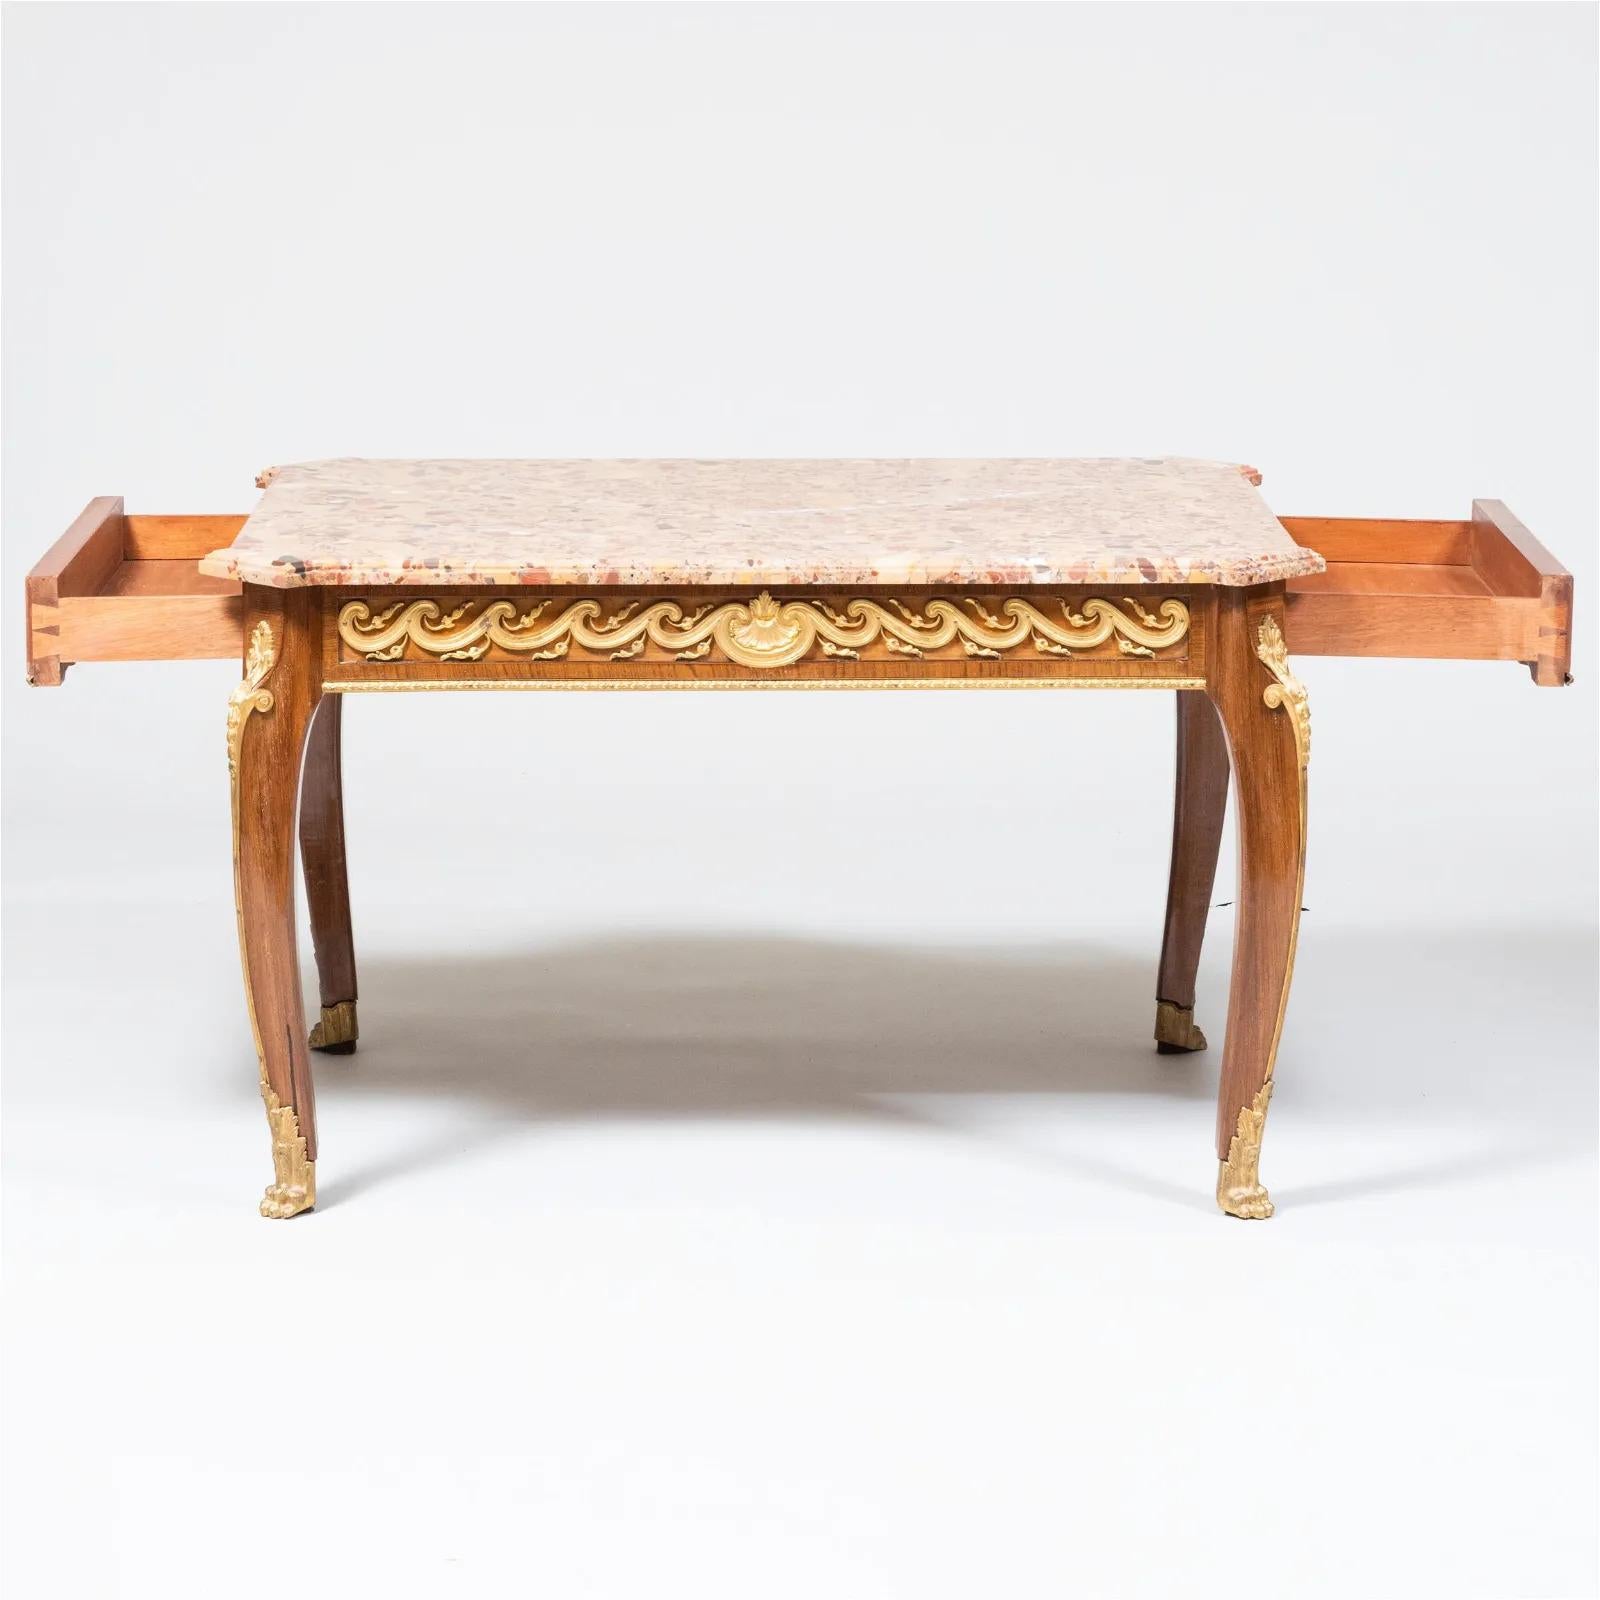 French Louis XVI Style Ormolu-Mounted Mahogany Coffee Table, C. 1880 In Good Condition For Sale In New York, NY